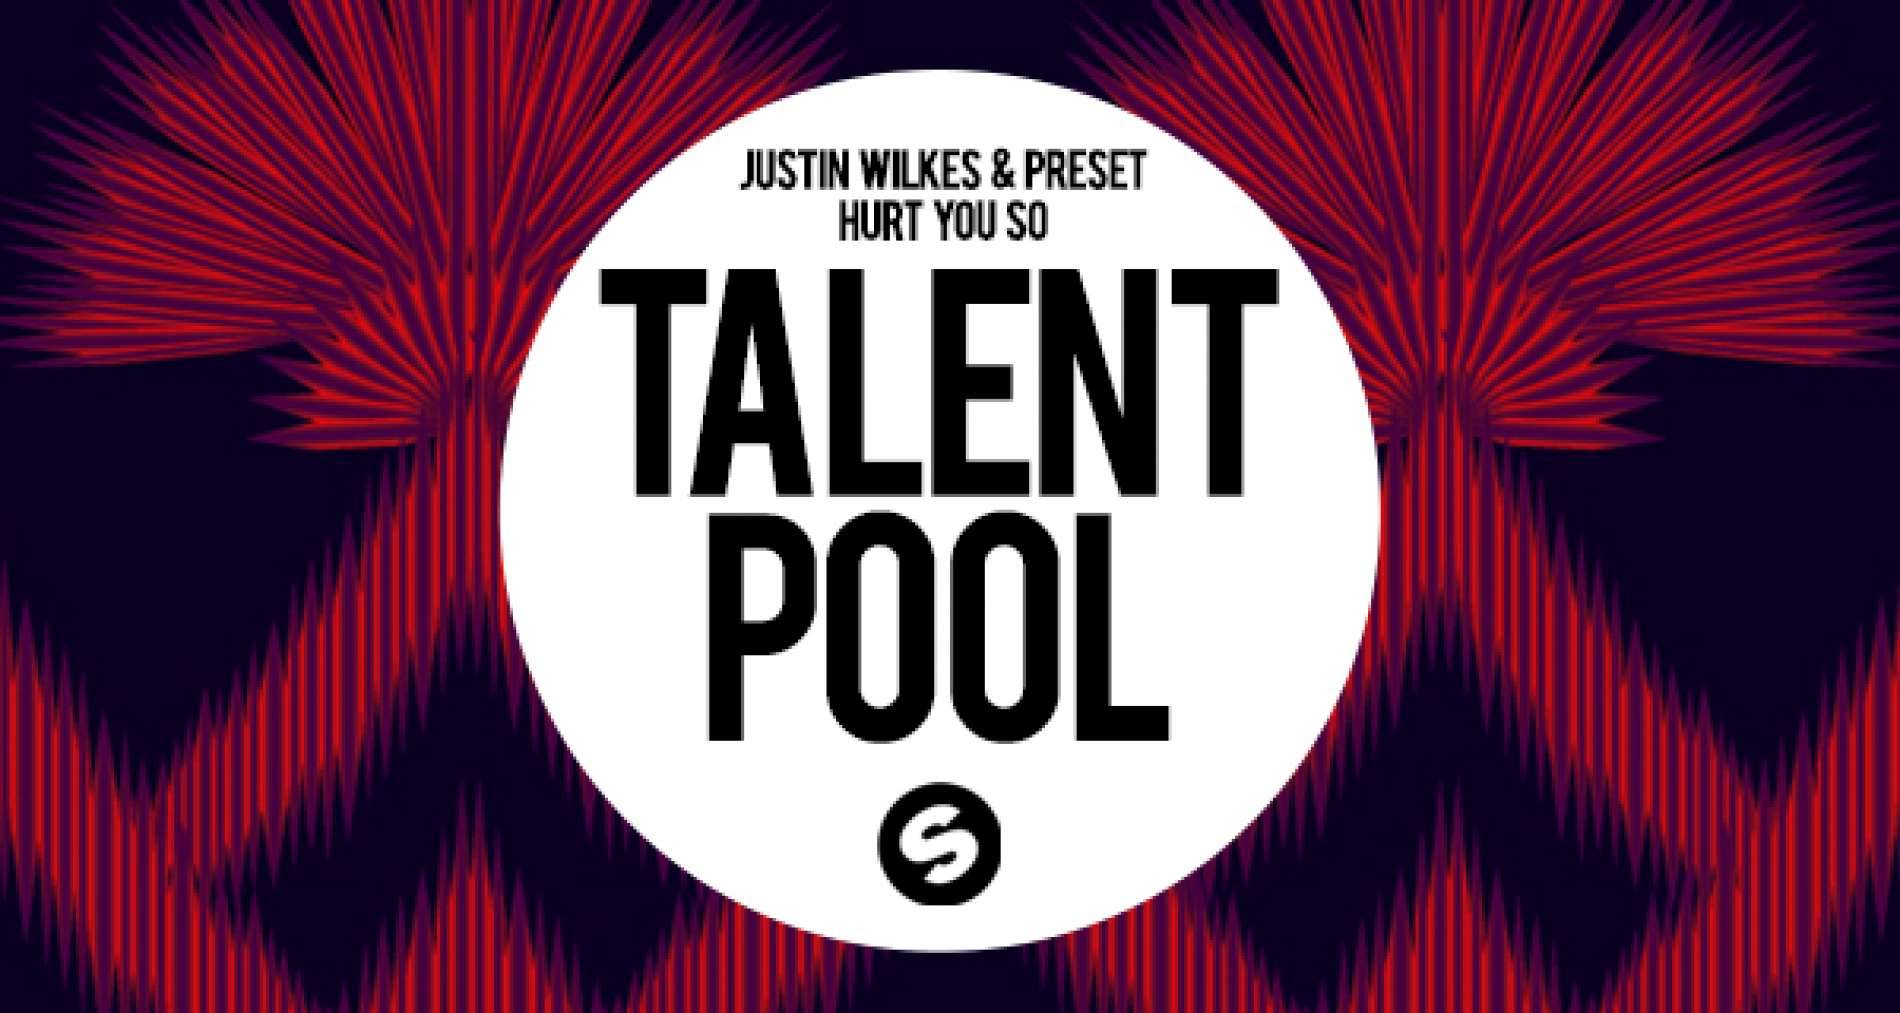 Another track picked from the Talent Pool